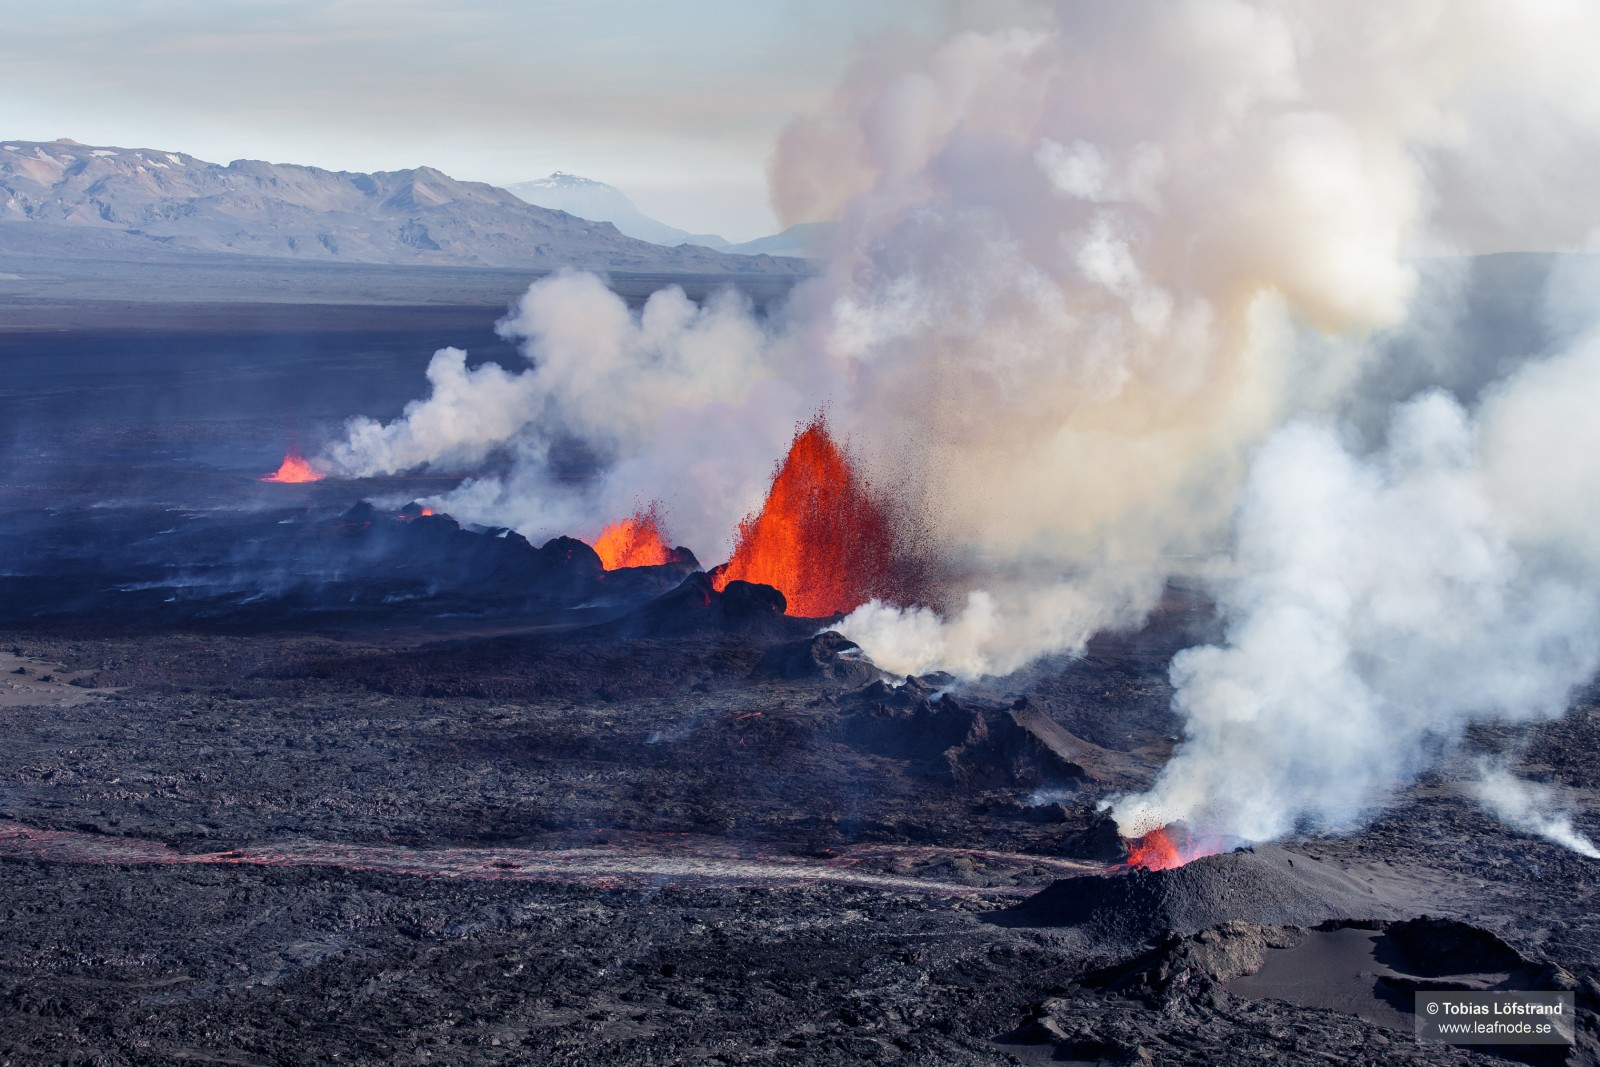 The fountains of lava accompanied by clouds of steam and sulphur-dioxide. The magma flowed 46 km underground from Bárðarbunga volcano to the eventual eruption site at Holuhraun, where it erupted continuously for 6 months. Photo Credit: Tobias Löfstrand